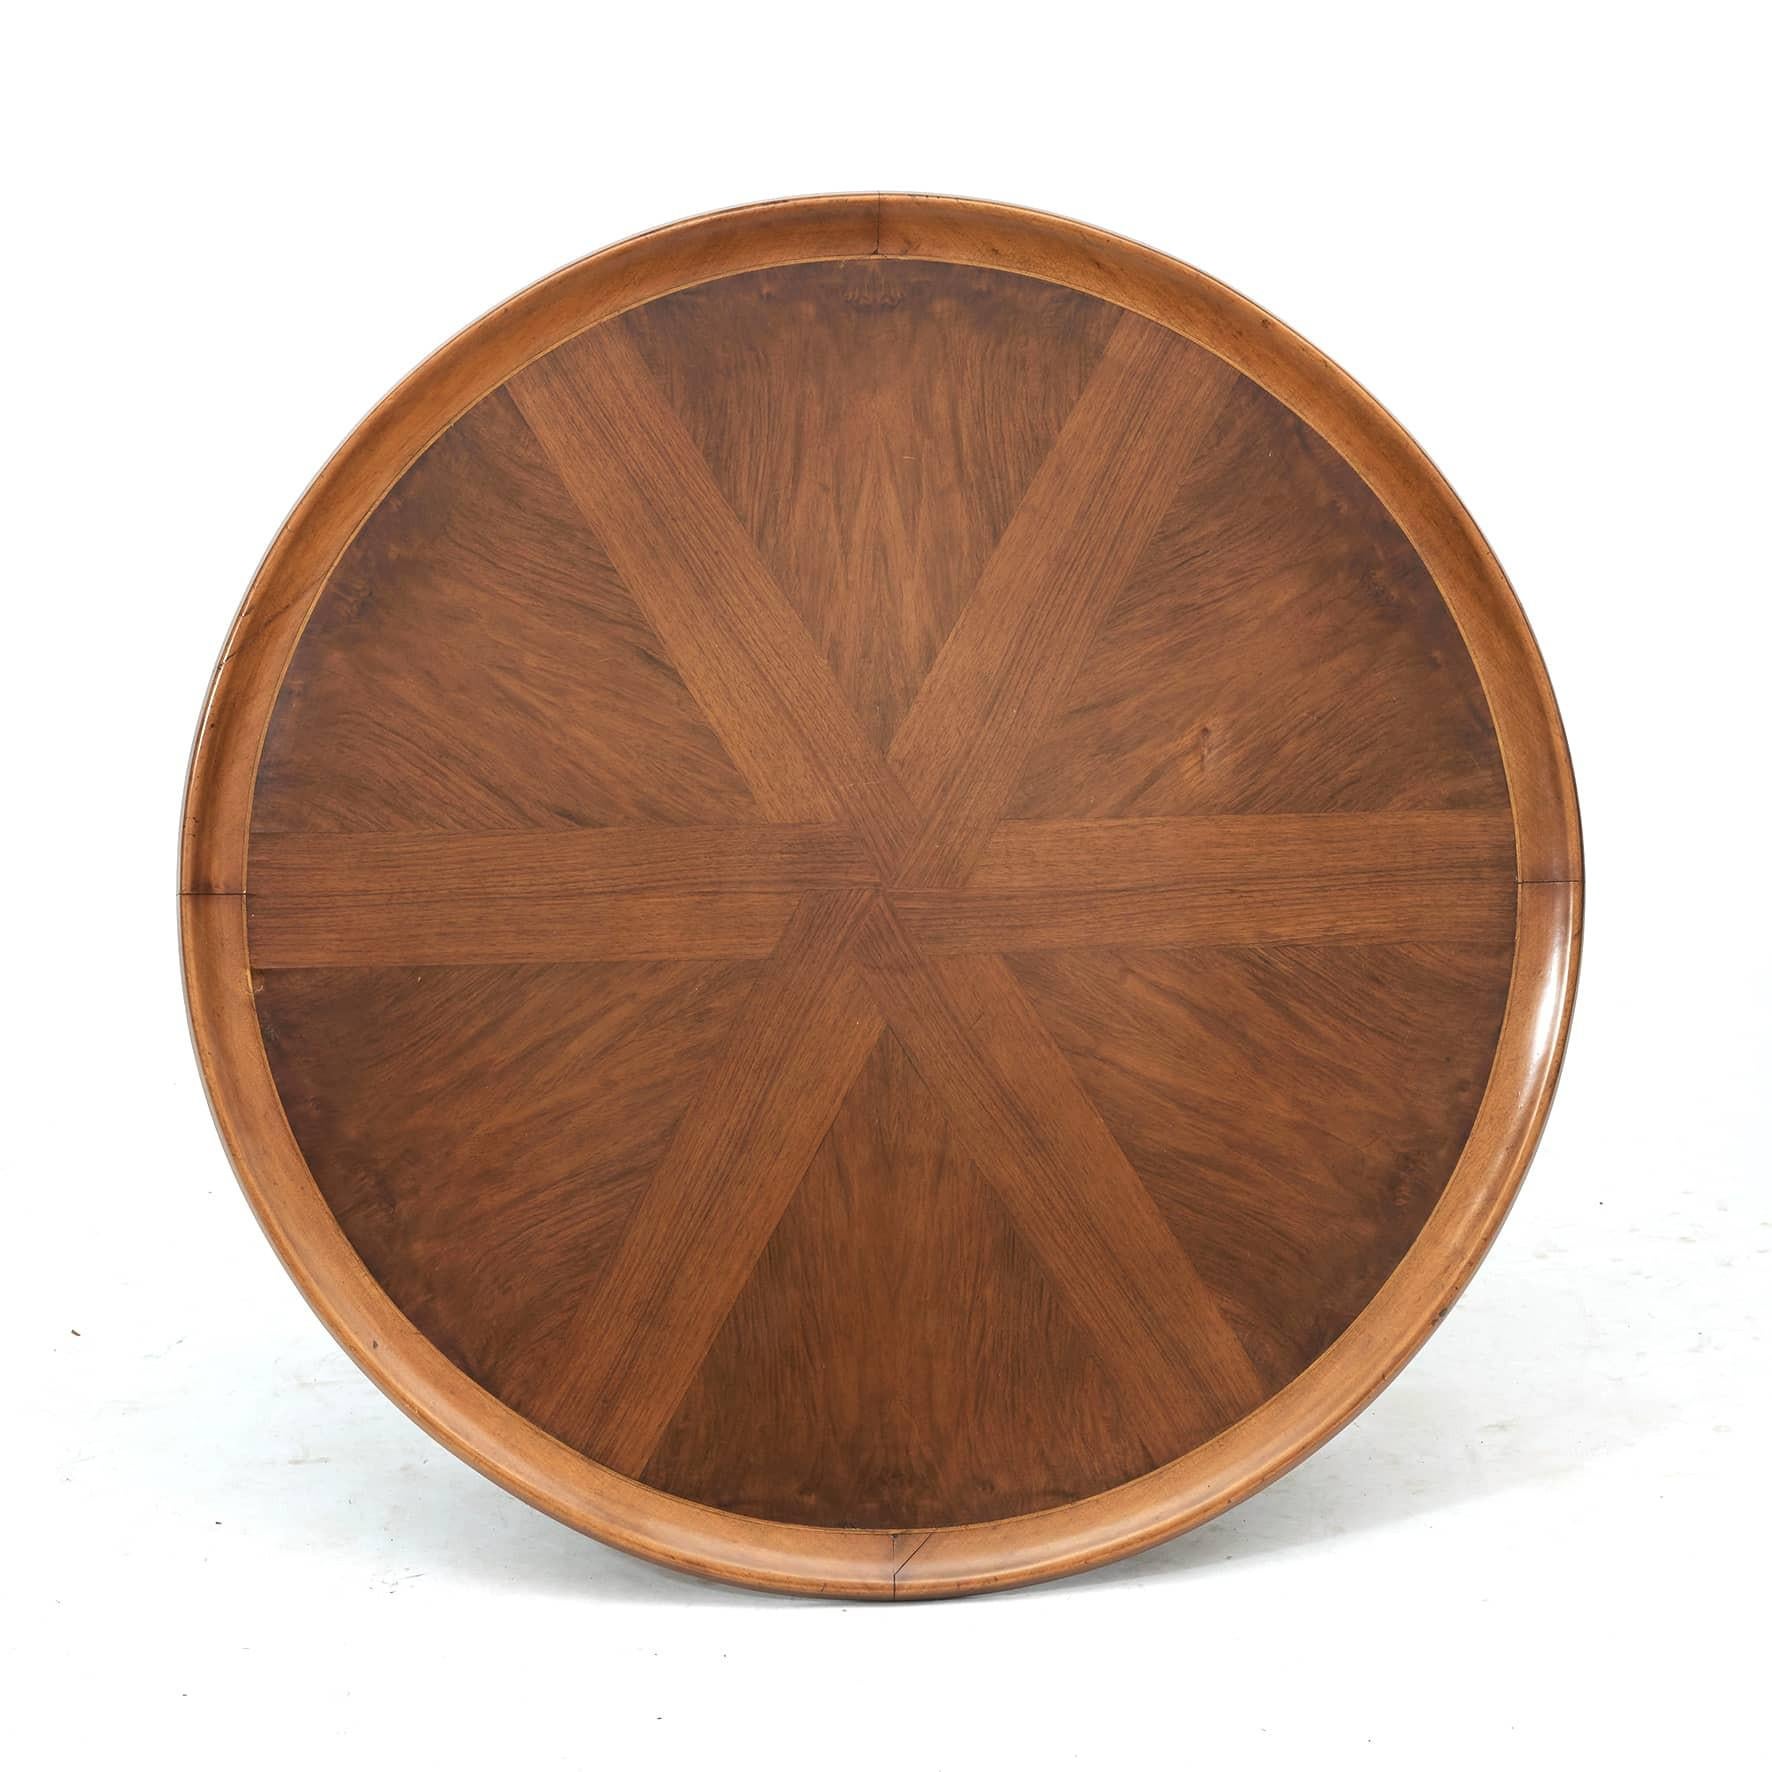 Coffee table, Danish mid-century design.
Mahogany and walnut, circular tabletop with star-shaped veneer pattern and a raised edge with line marquetry. Raised on five octagonal legs joined by concave stretchers.
Made in Denmark in the 1960s.
Most